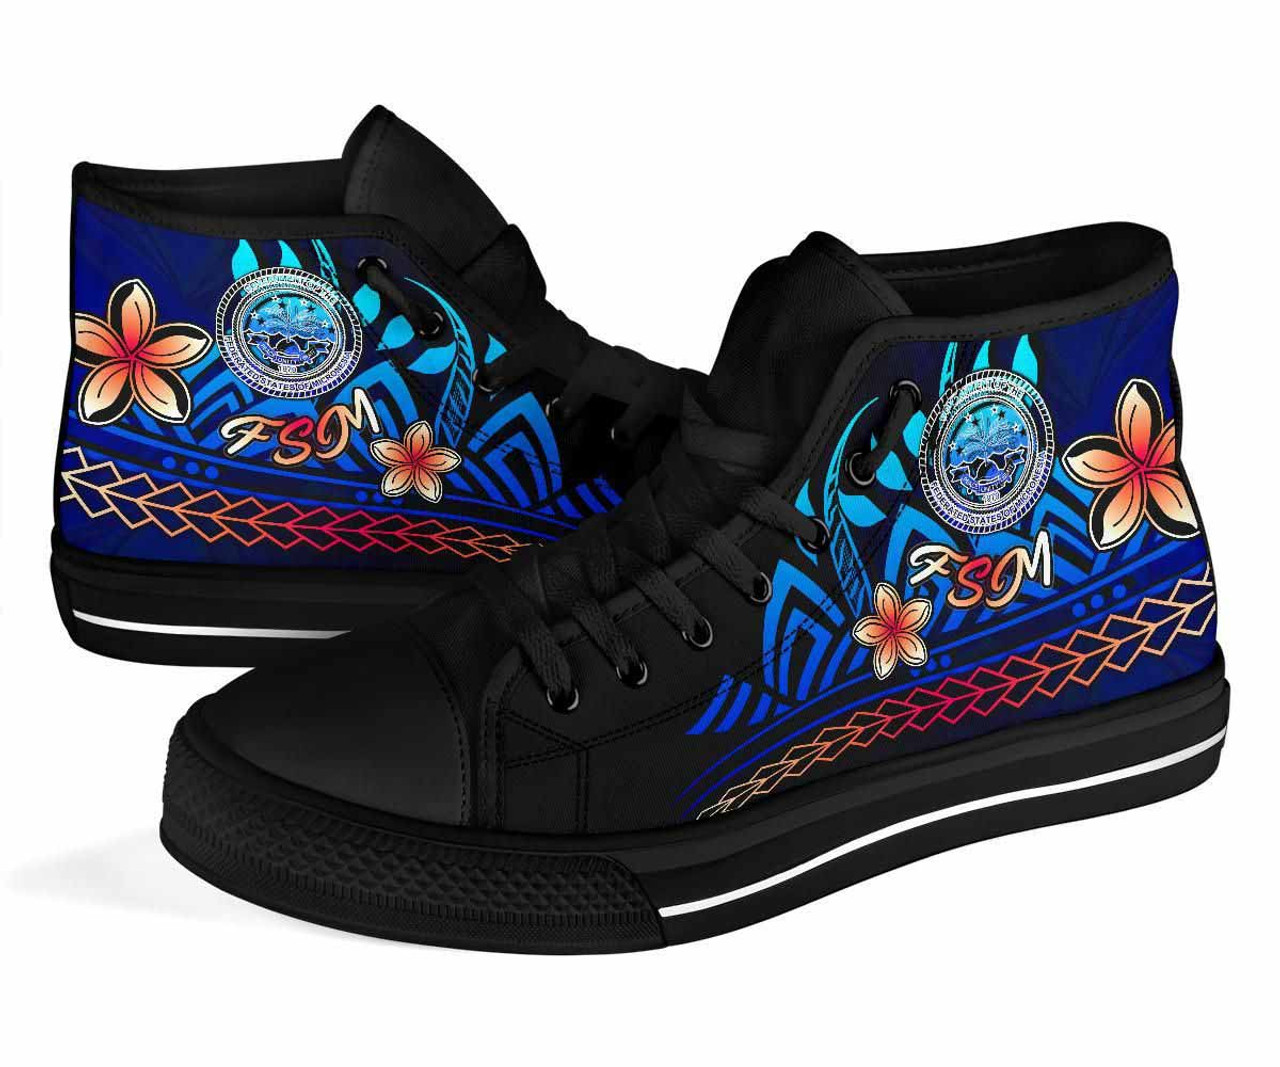 Federated States of Micronesia High Top Shoes Blue - Vintage Tribal Mountain 3